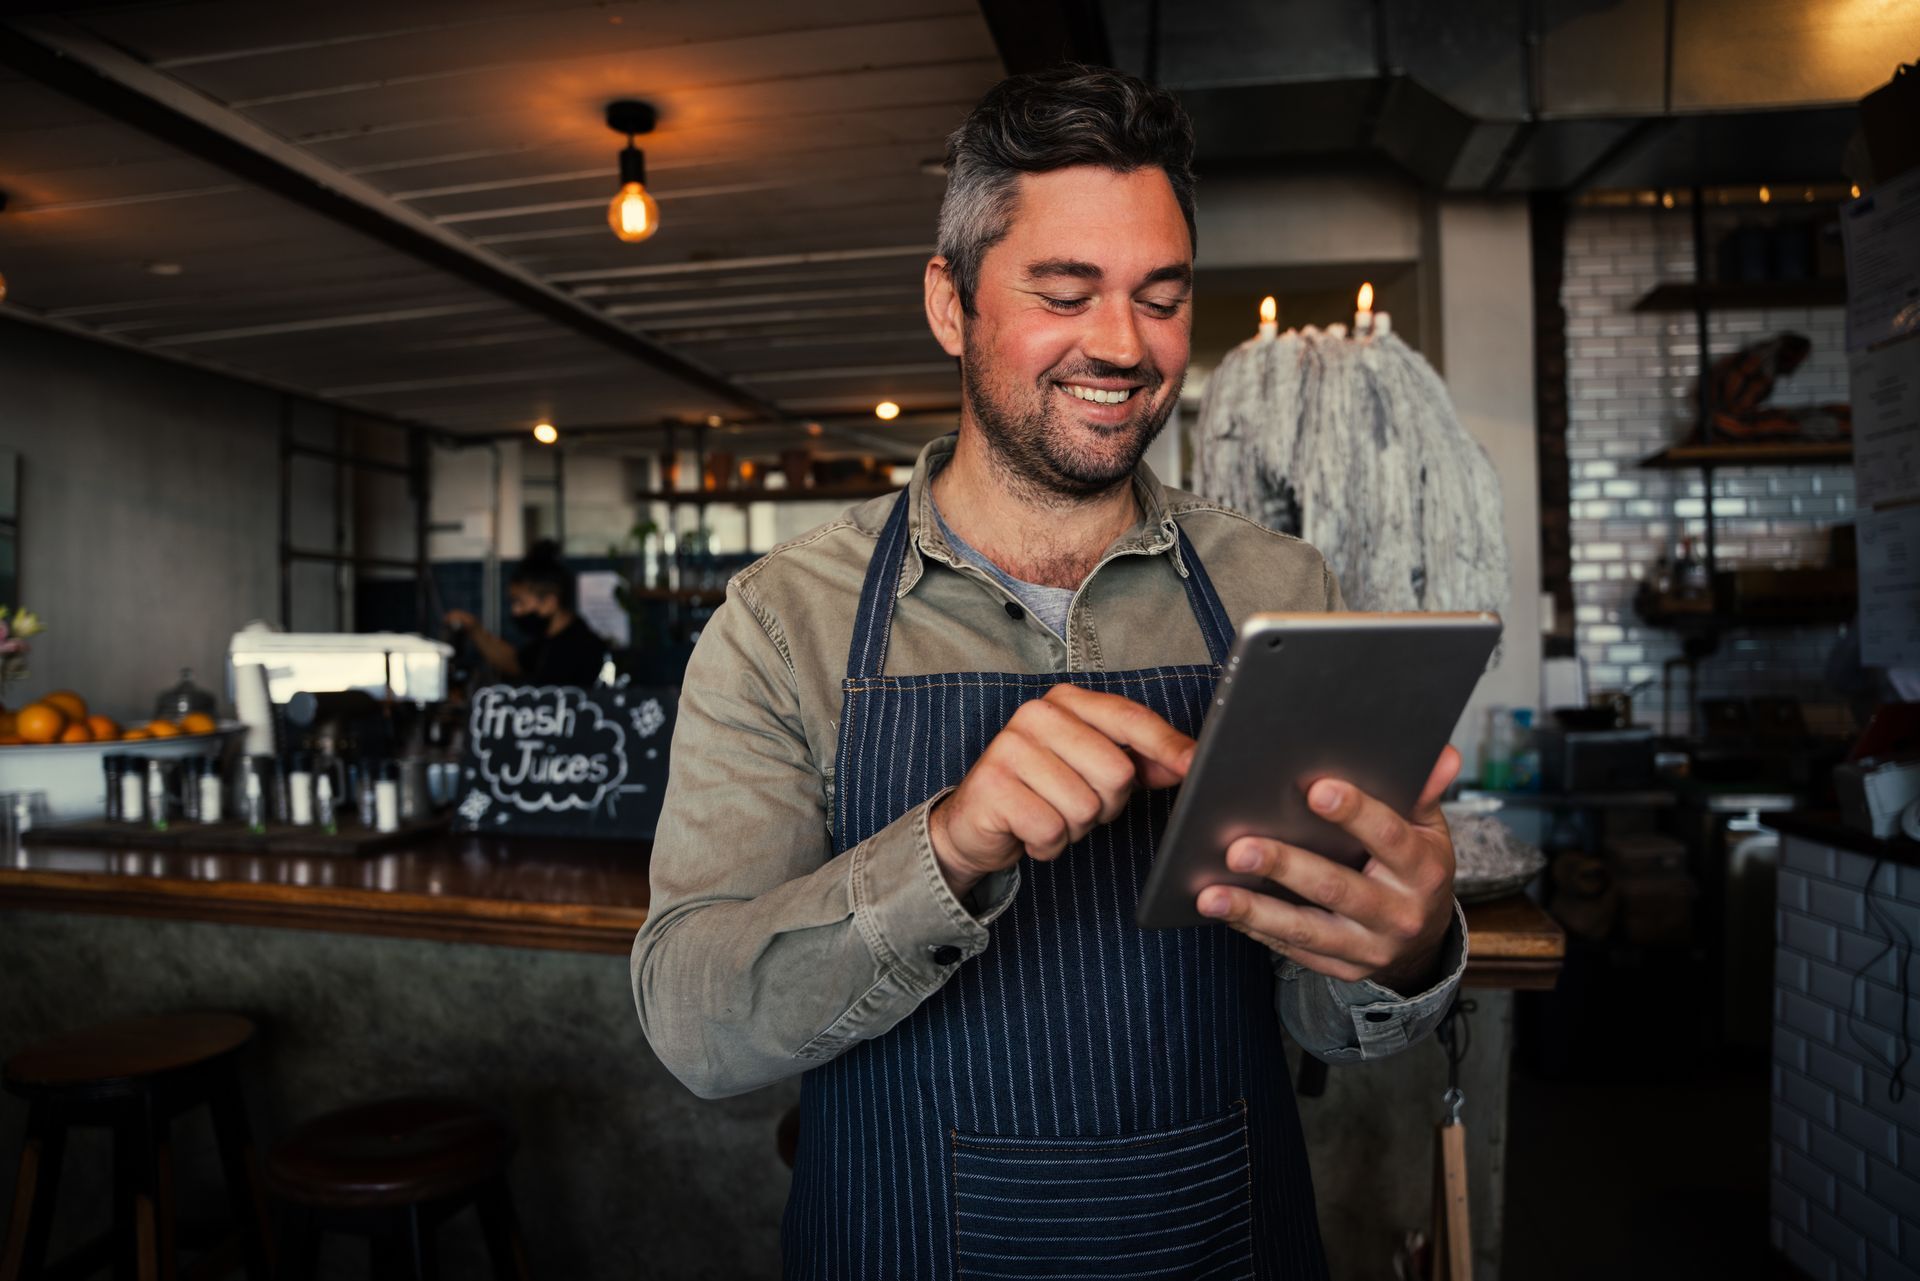 A man in an apron is using a tablet in a restaurant.